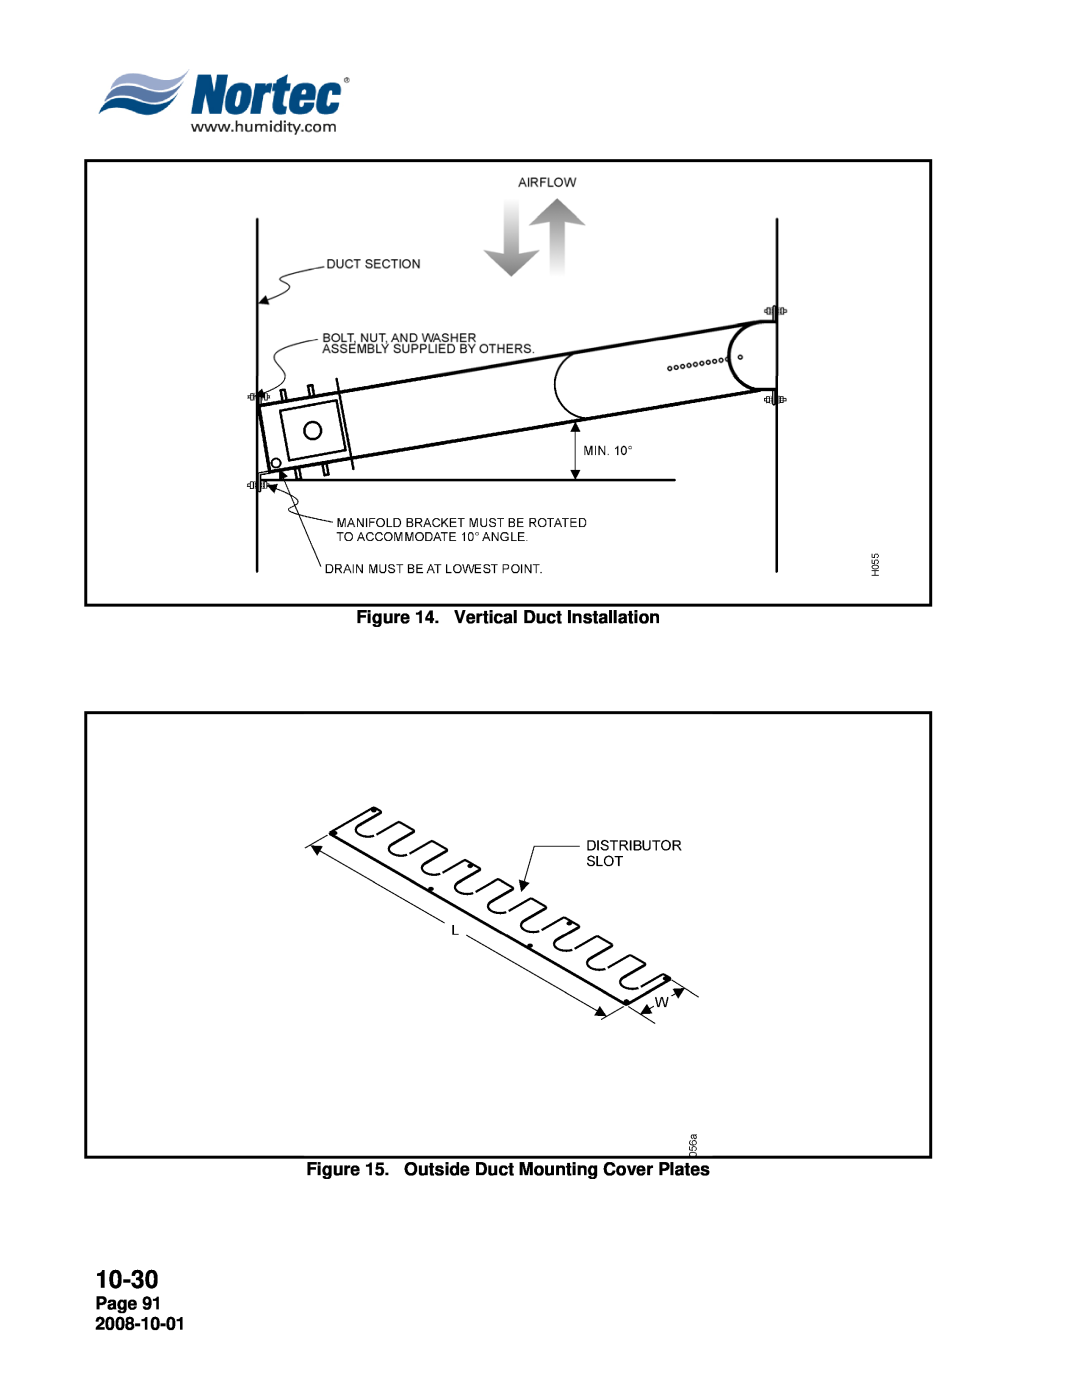 Nortec NHTC, NHPC manual 10-30, Vertical Duct Installation, Outside Duct Mounting Cover Plates, Page 91 